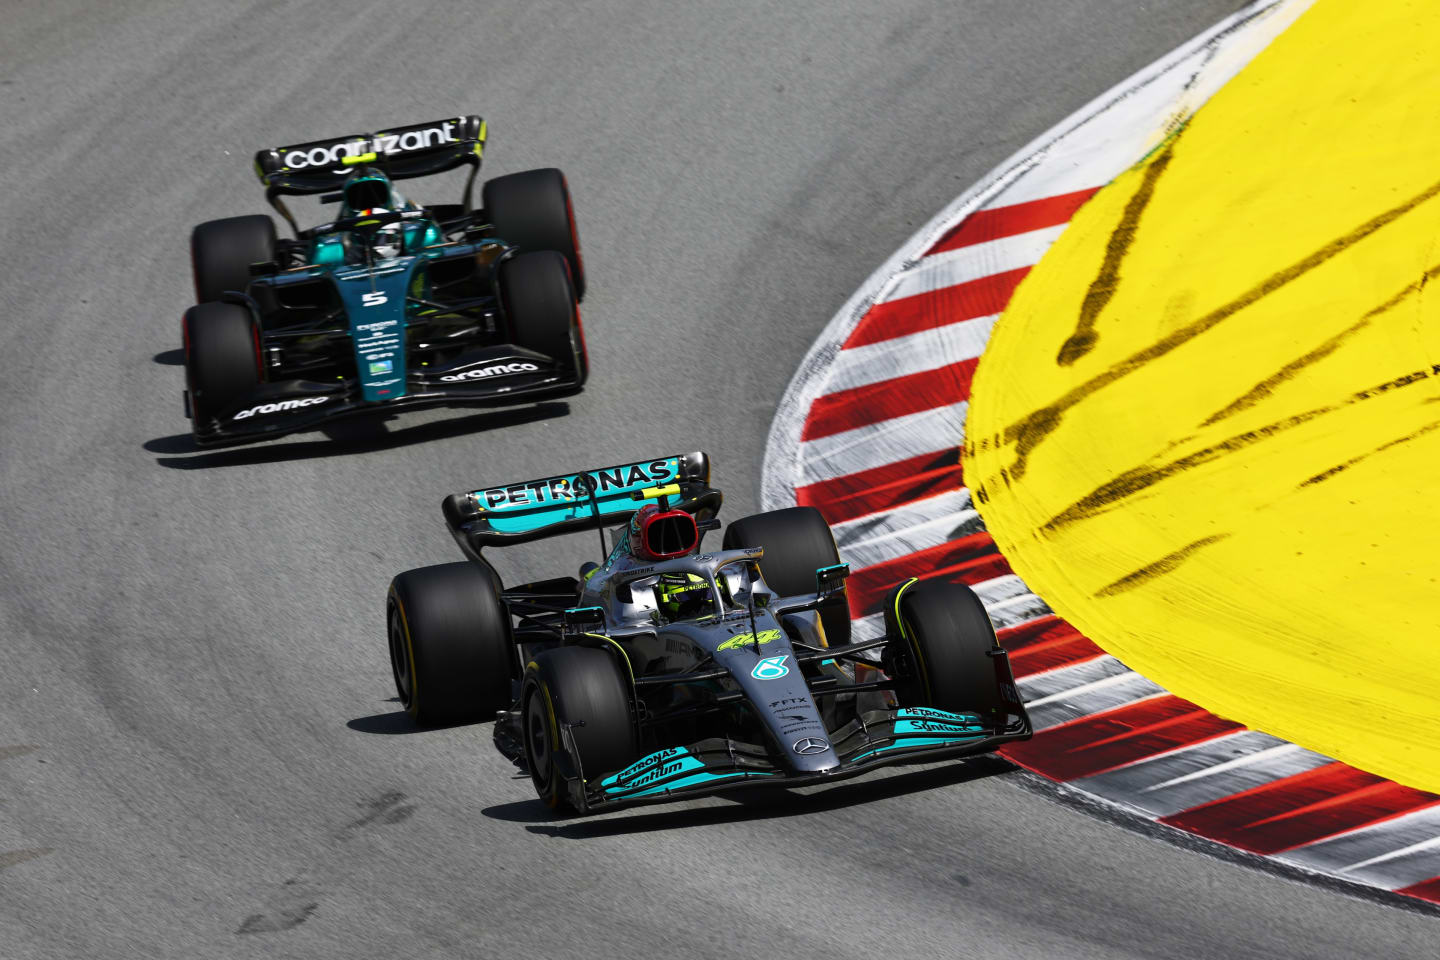 BARCELONA, SPAIN - MAY 22: Lewis Hamilton of Great Britain driving the (44) Mercedes AMG Petronas